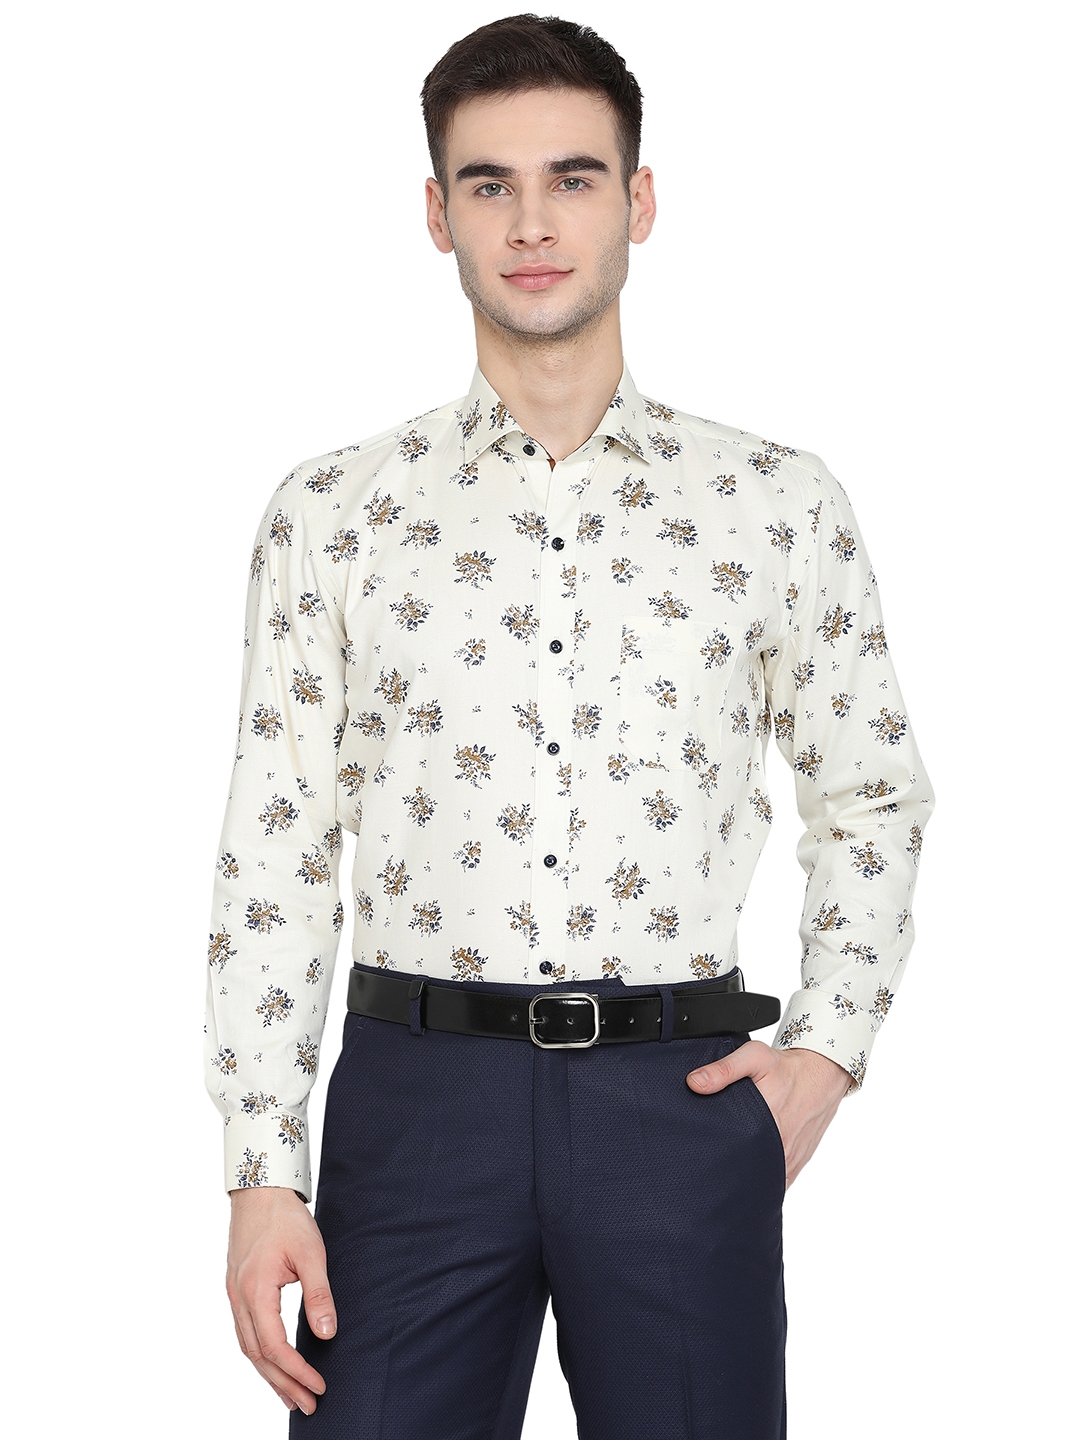 Greenfibre | Cream Printed Slim Fit Party Wear Shirt | Greenfibre 0